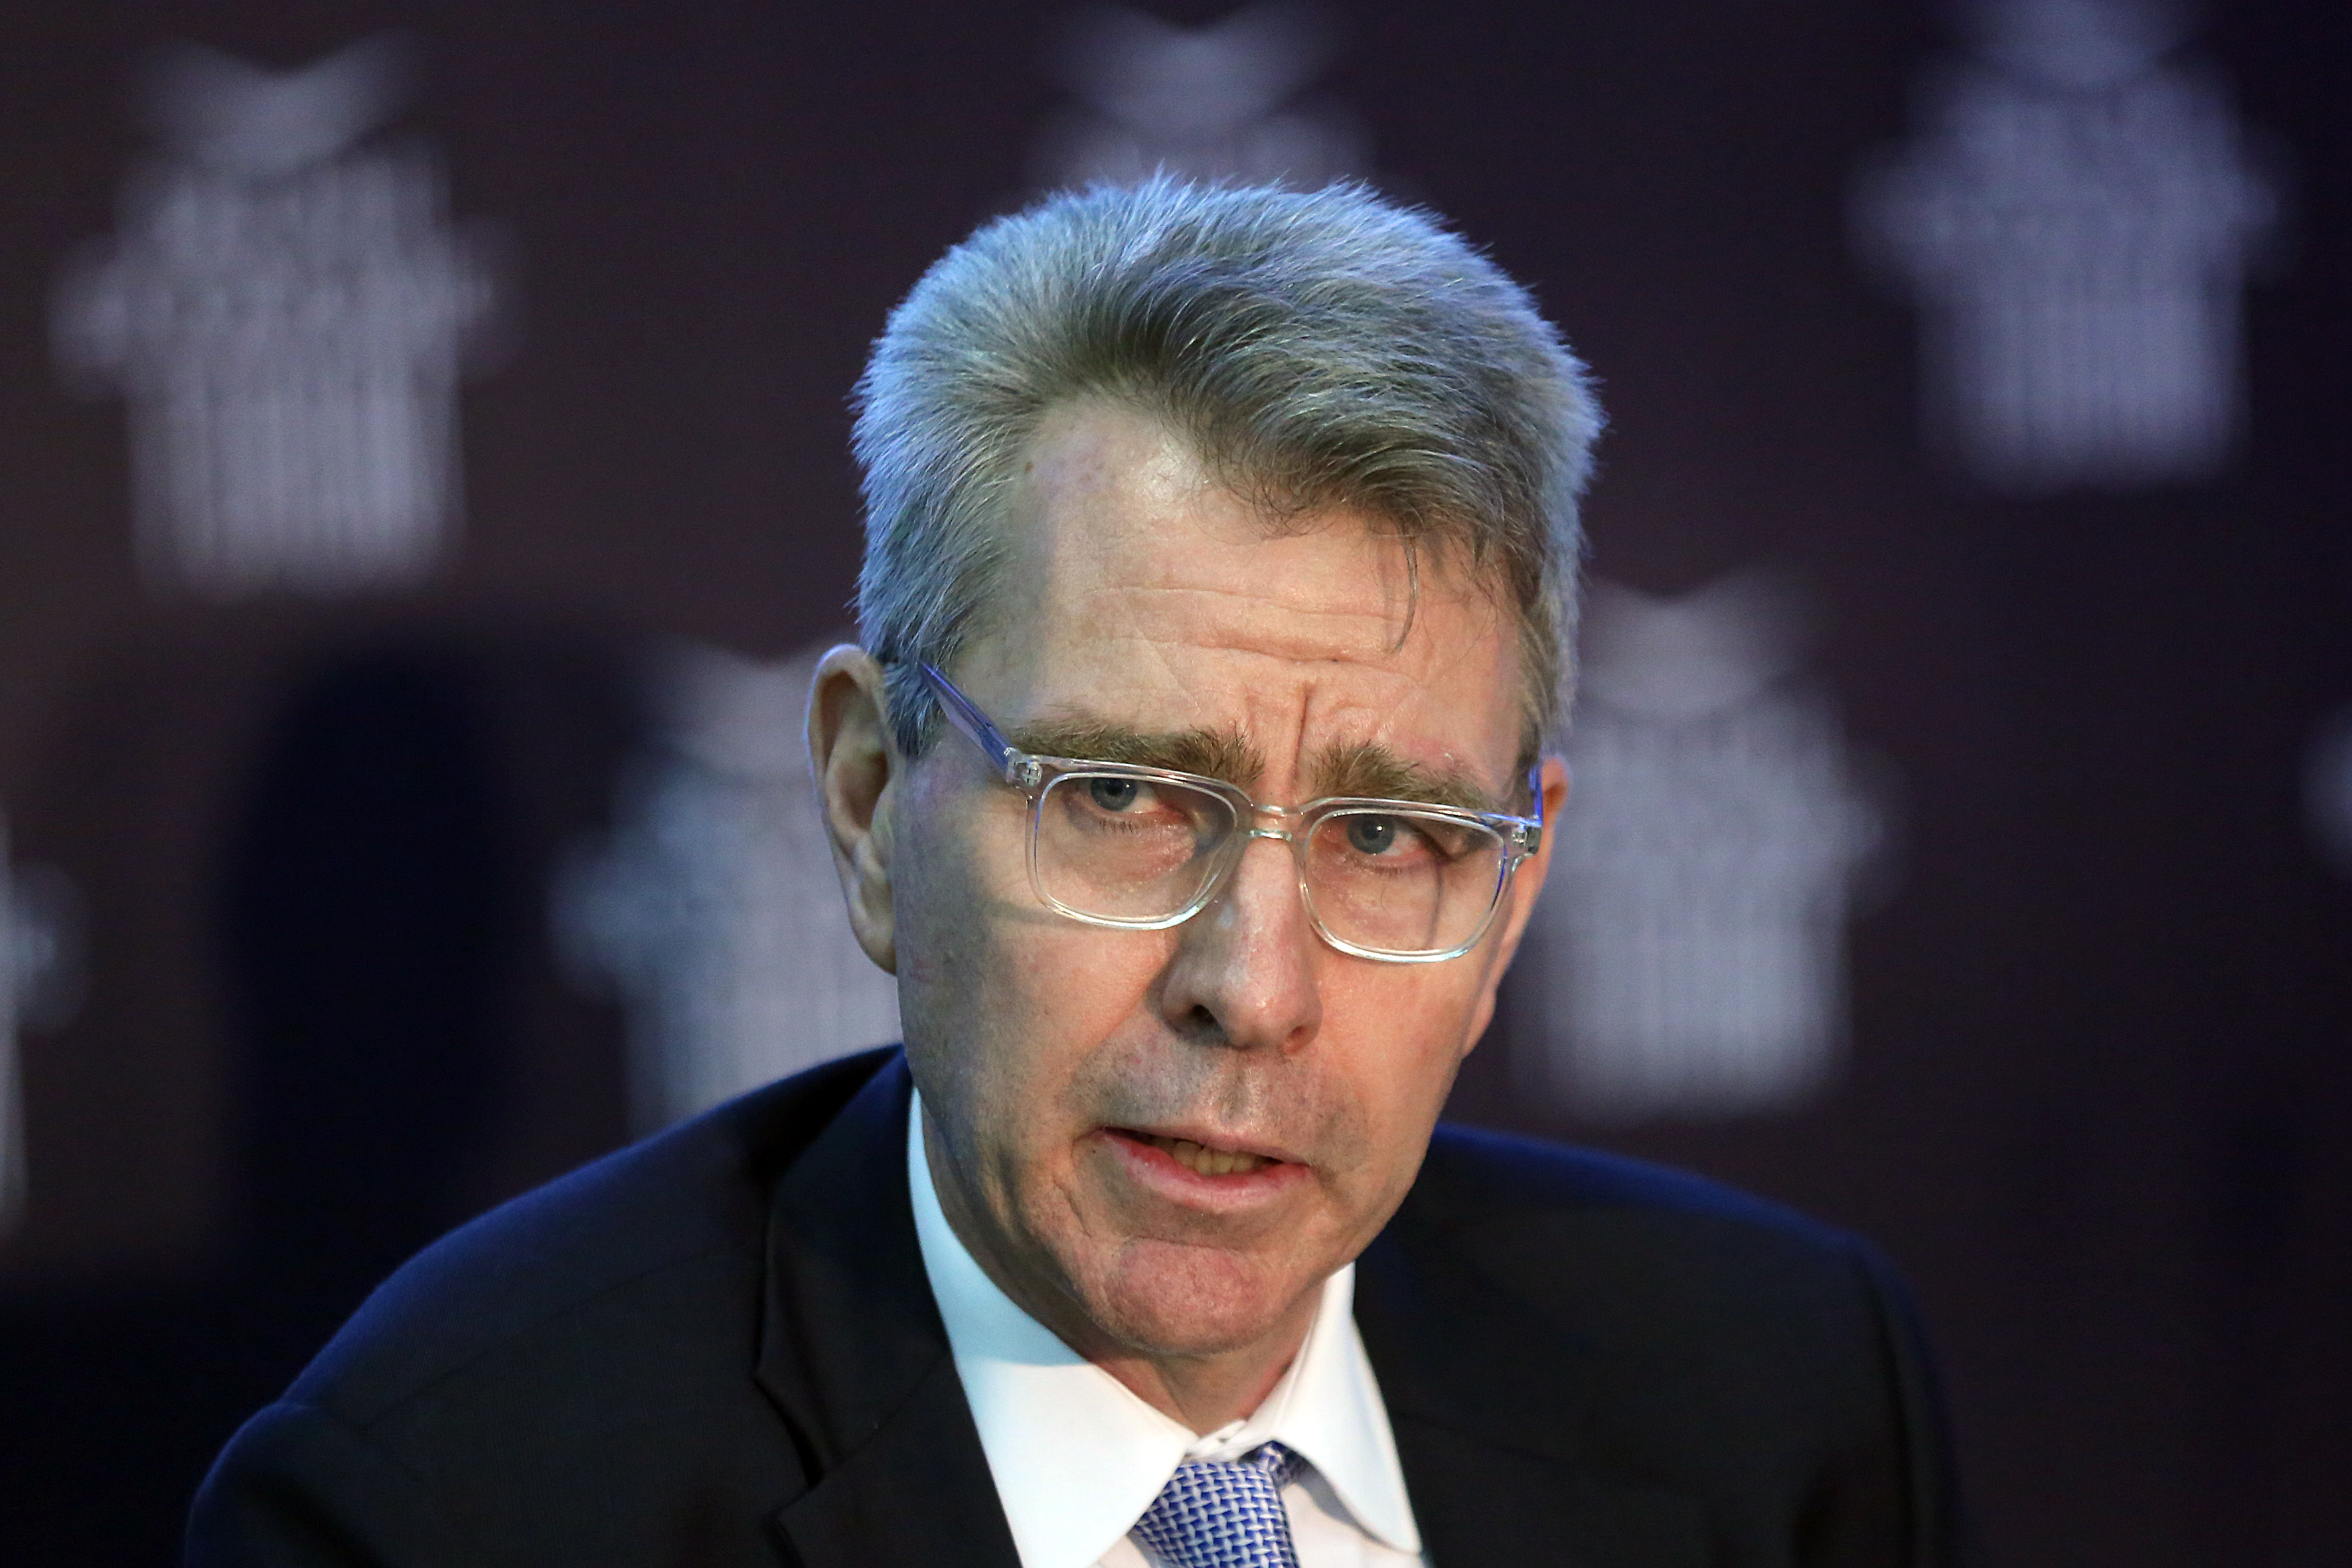 Pyatt supports Tsipras’ quest to engage with Turkey, return of Greek officers